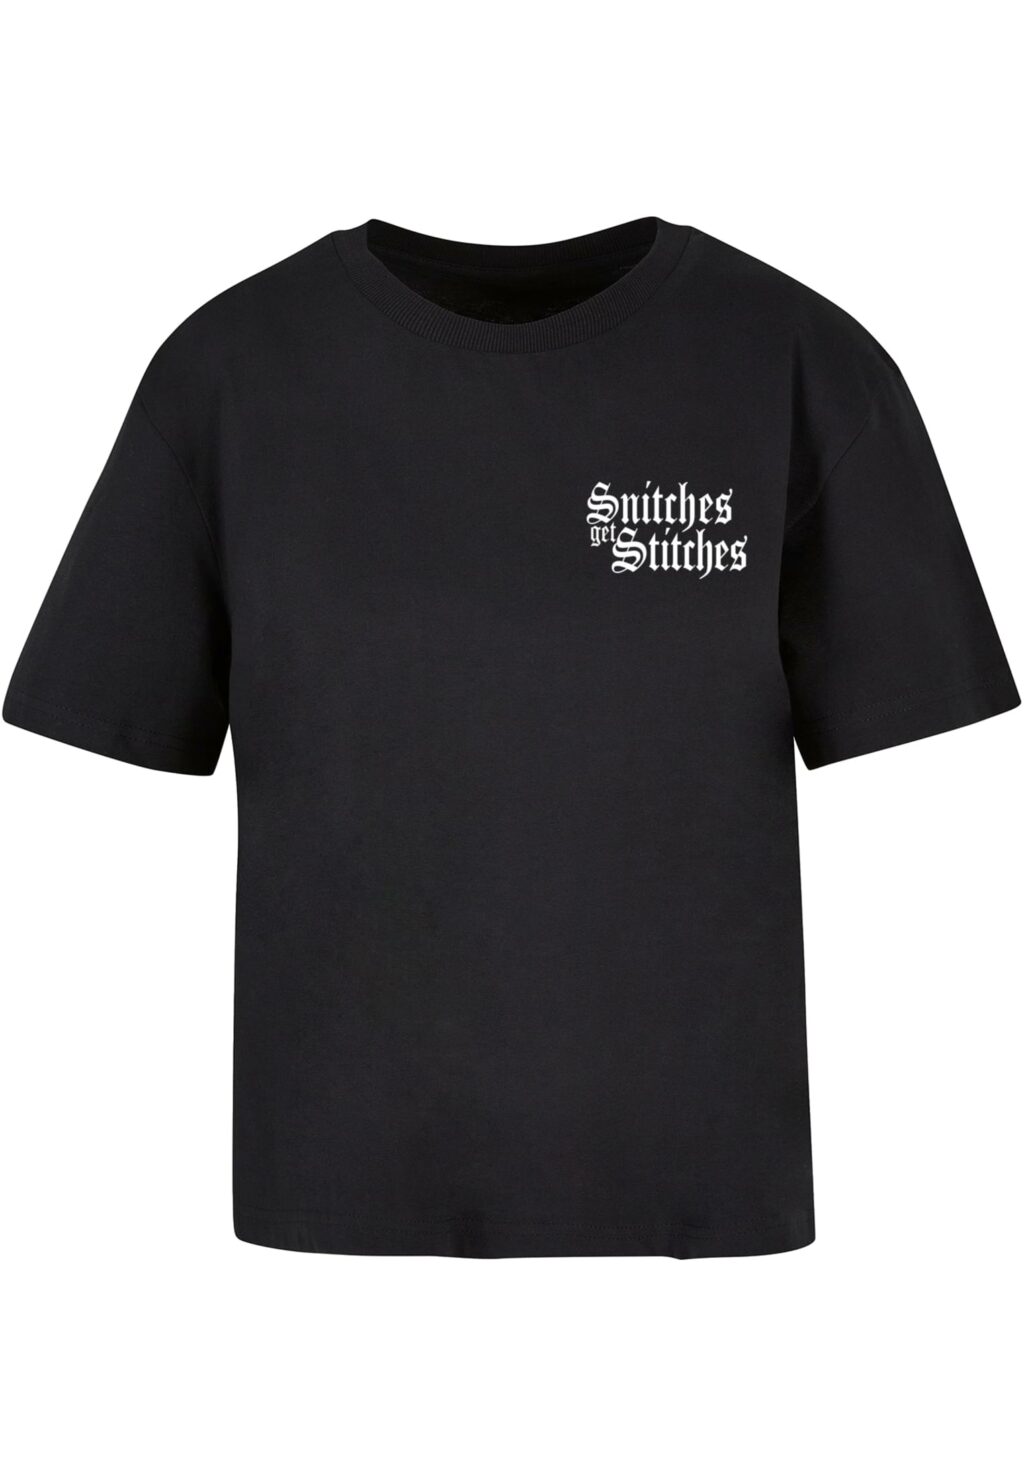 Snitches Get Stitches Tee black MST104